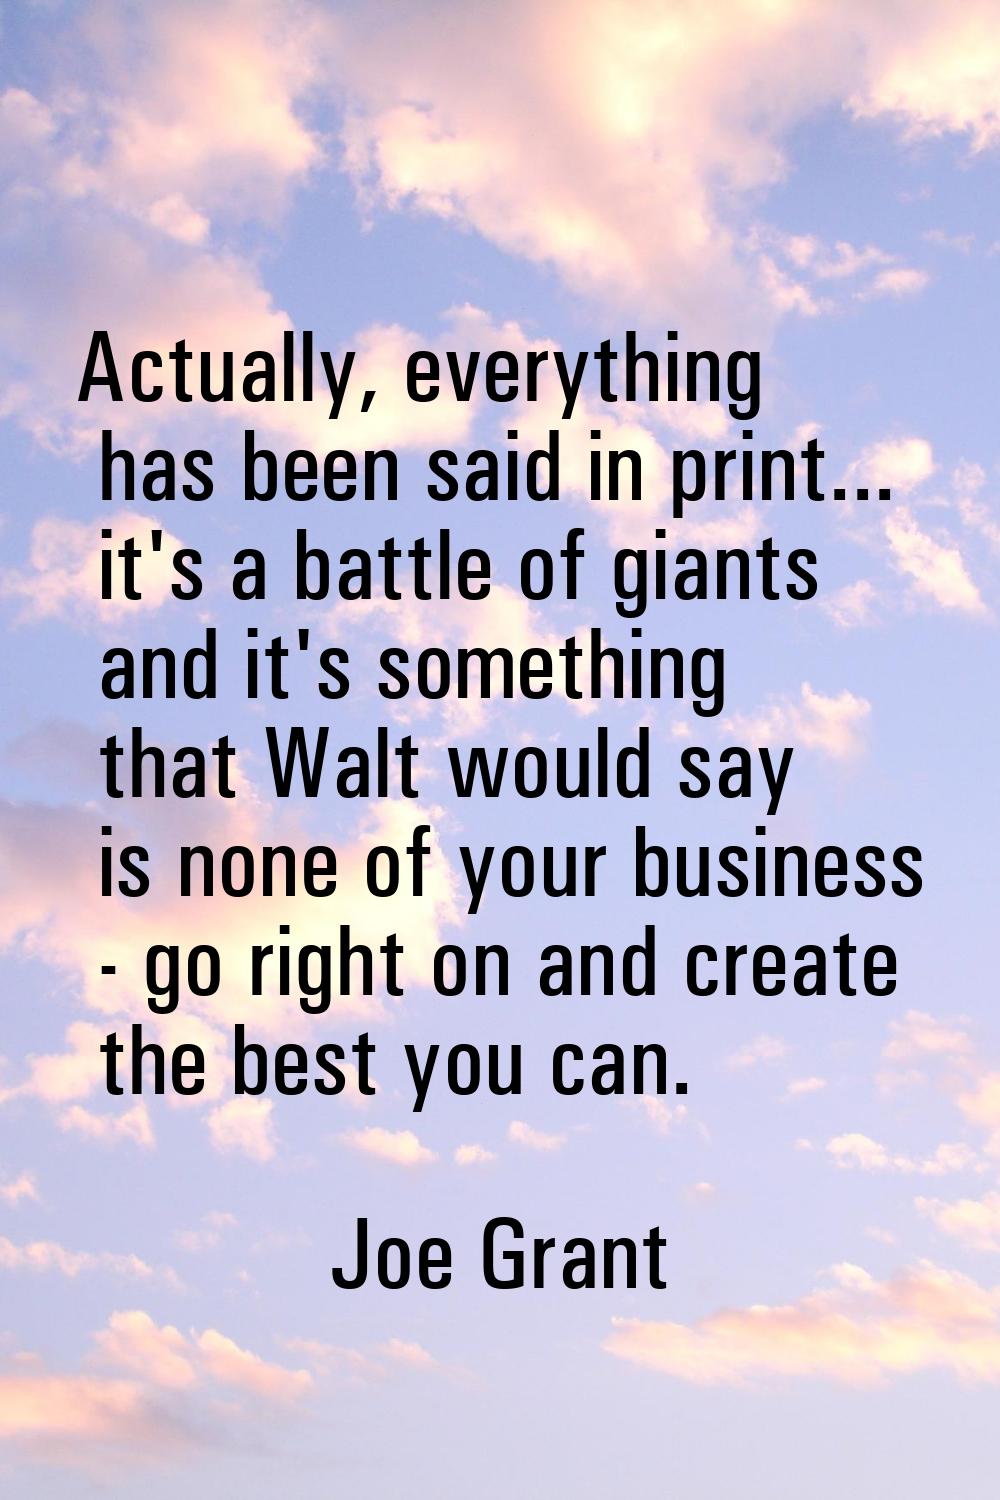 Actually, everything has been said in print... it's a battle of giants and it's something that Walt